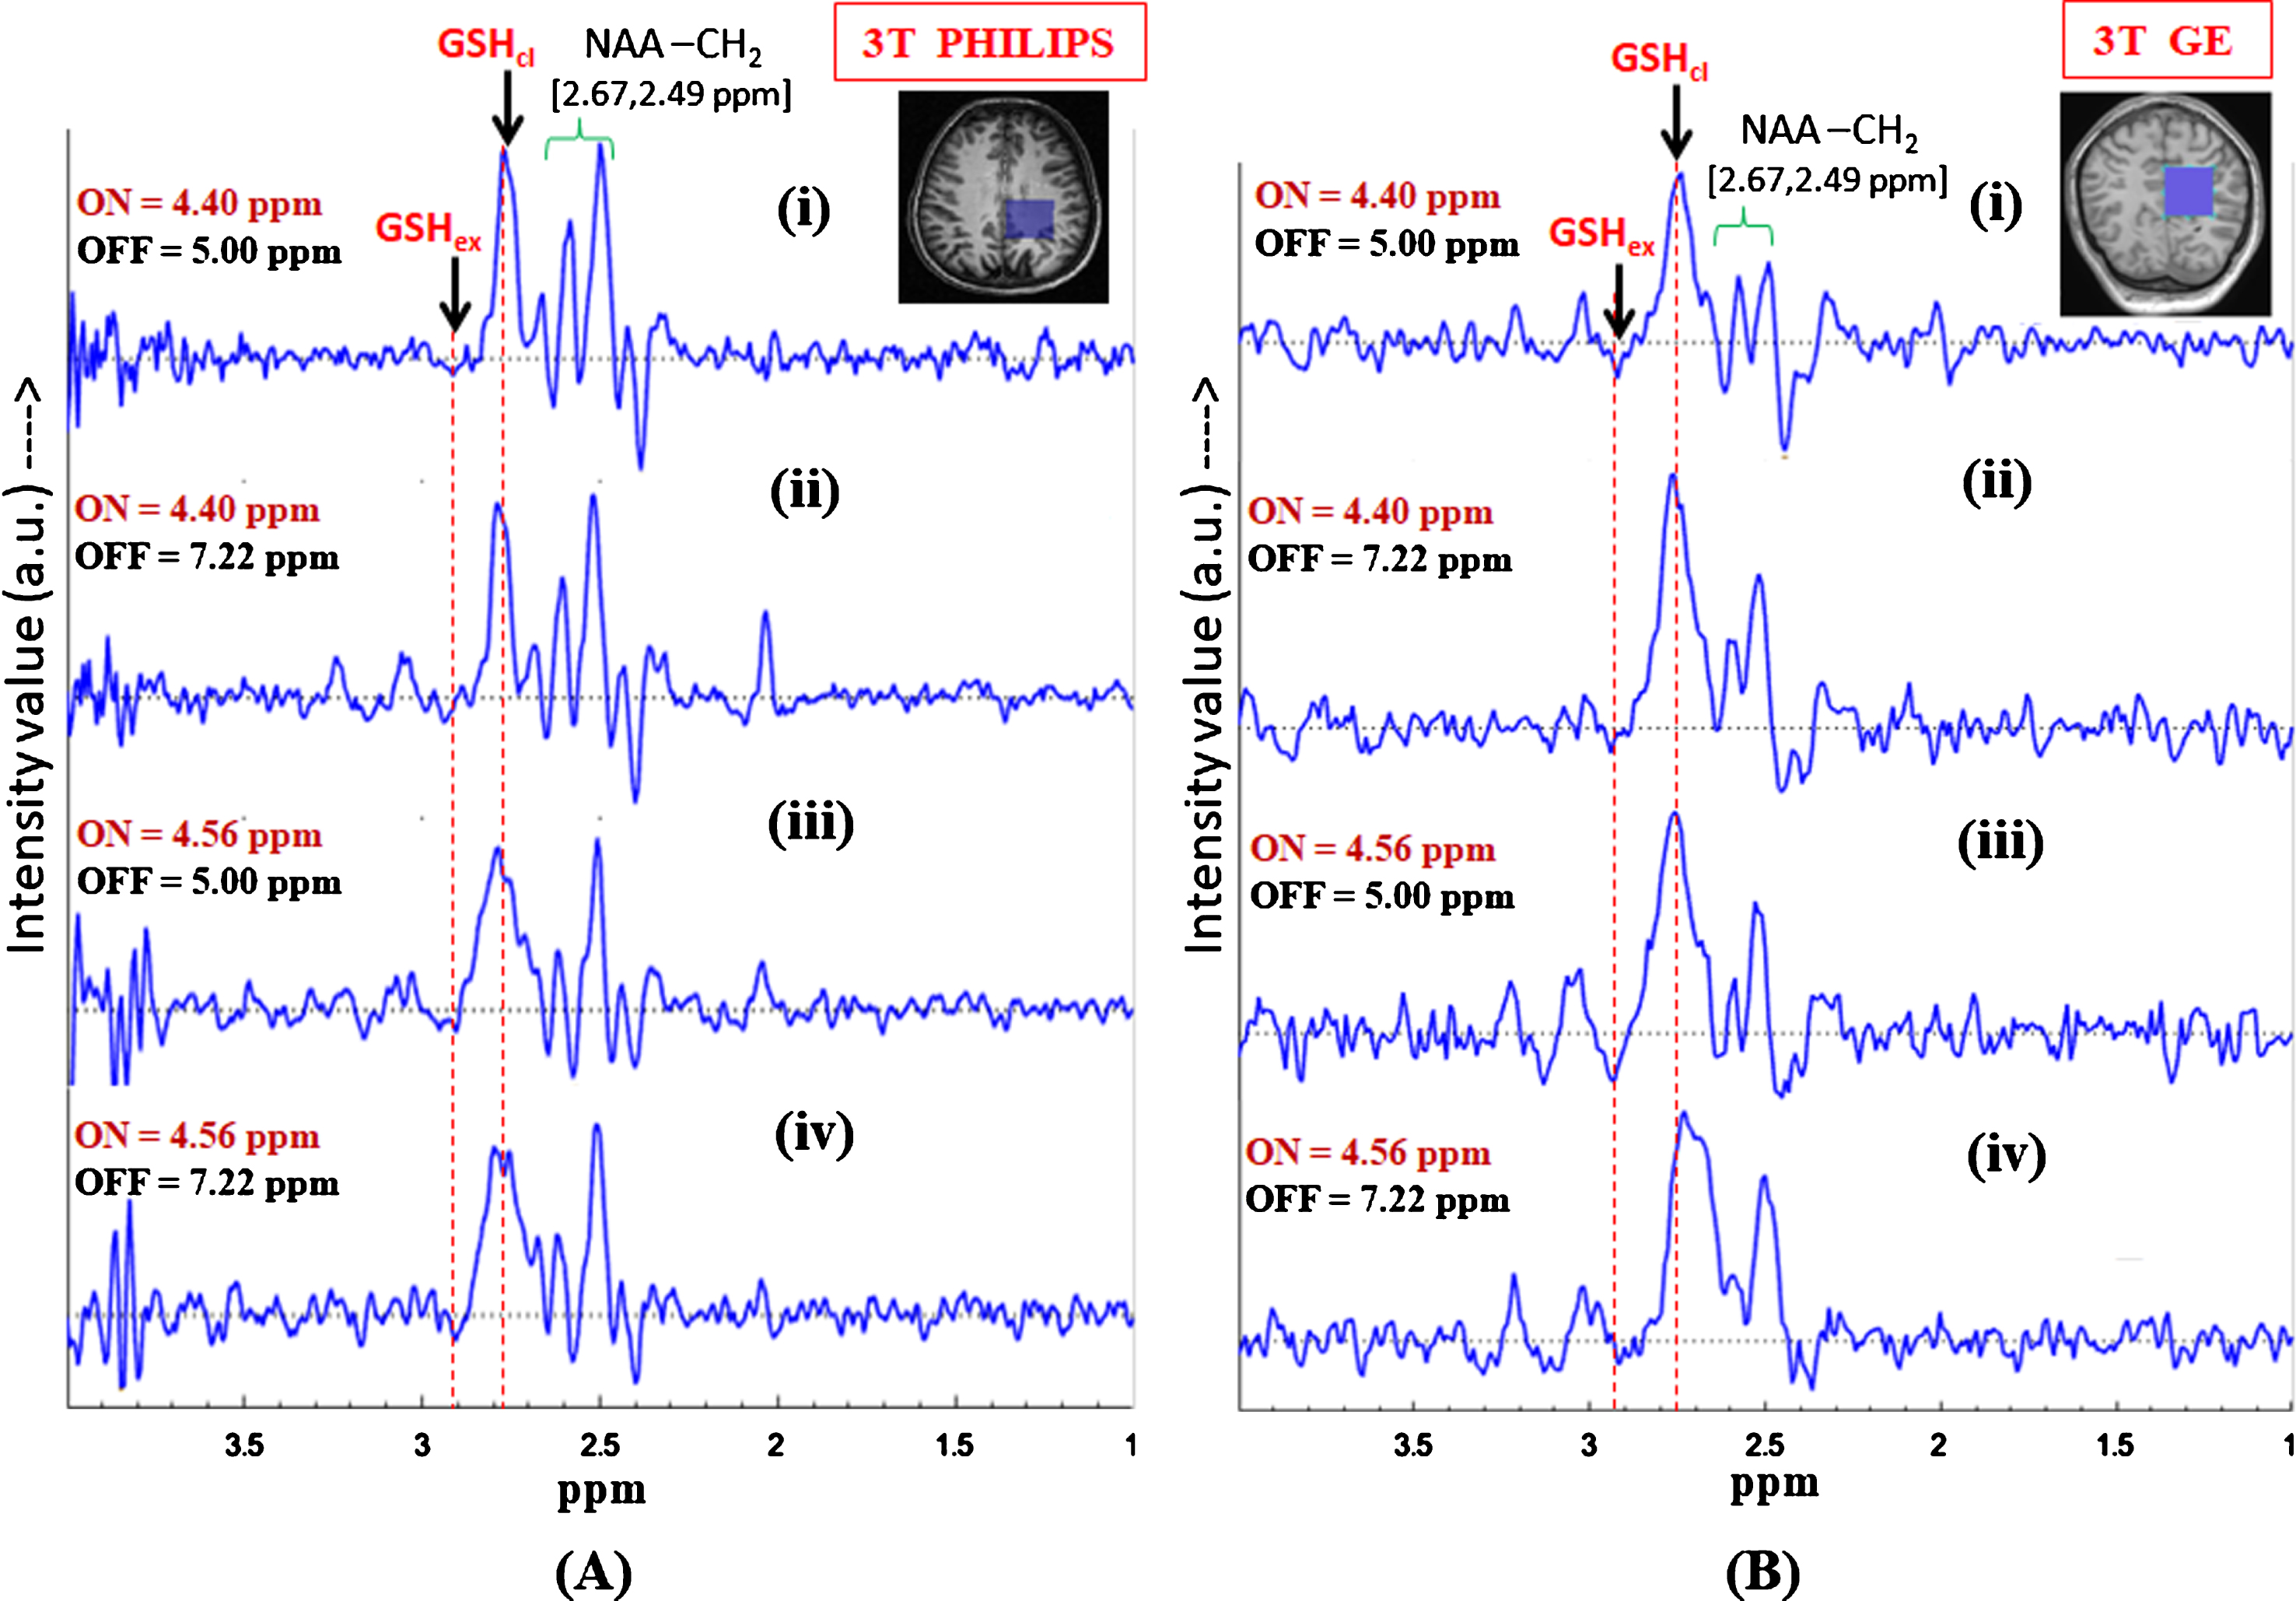 Effect of inversion pulse position on the in vivo GSH conformer peak detection using MEGA-PRESS sequence. Validation of the two GSH conformal peaks in different published protocols for MEGA-ON, MEGA-OFF (ON/OFF = 4.40 ppm/5.0 ppm; 4.40 ppm/7.22 ppm; 4.56 ppm/5.0 ppm, 4.56 ppm/7.22 ppm; TE = 120 ms; TR = 2500 ms, voxel size = 3.5×3.5×3.5 cm3 on left parietal cortex) using (A) Philips scanner (Indian site) (B) GE scanner (Norwegian site) (both the peaks are present irrespective of the chosen protocols).